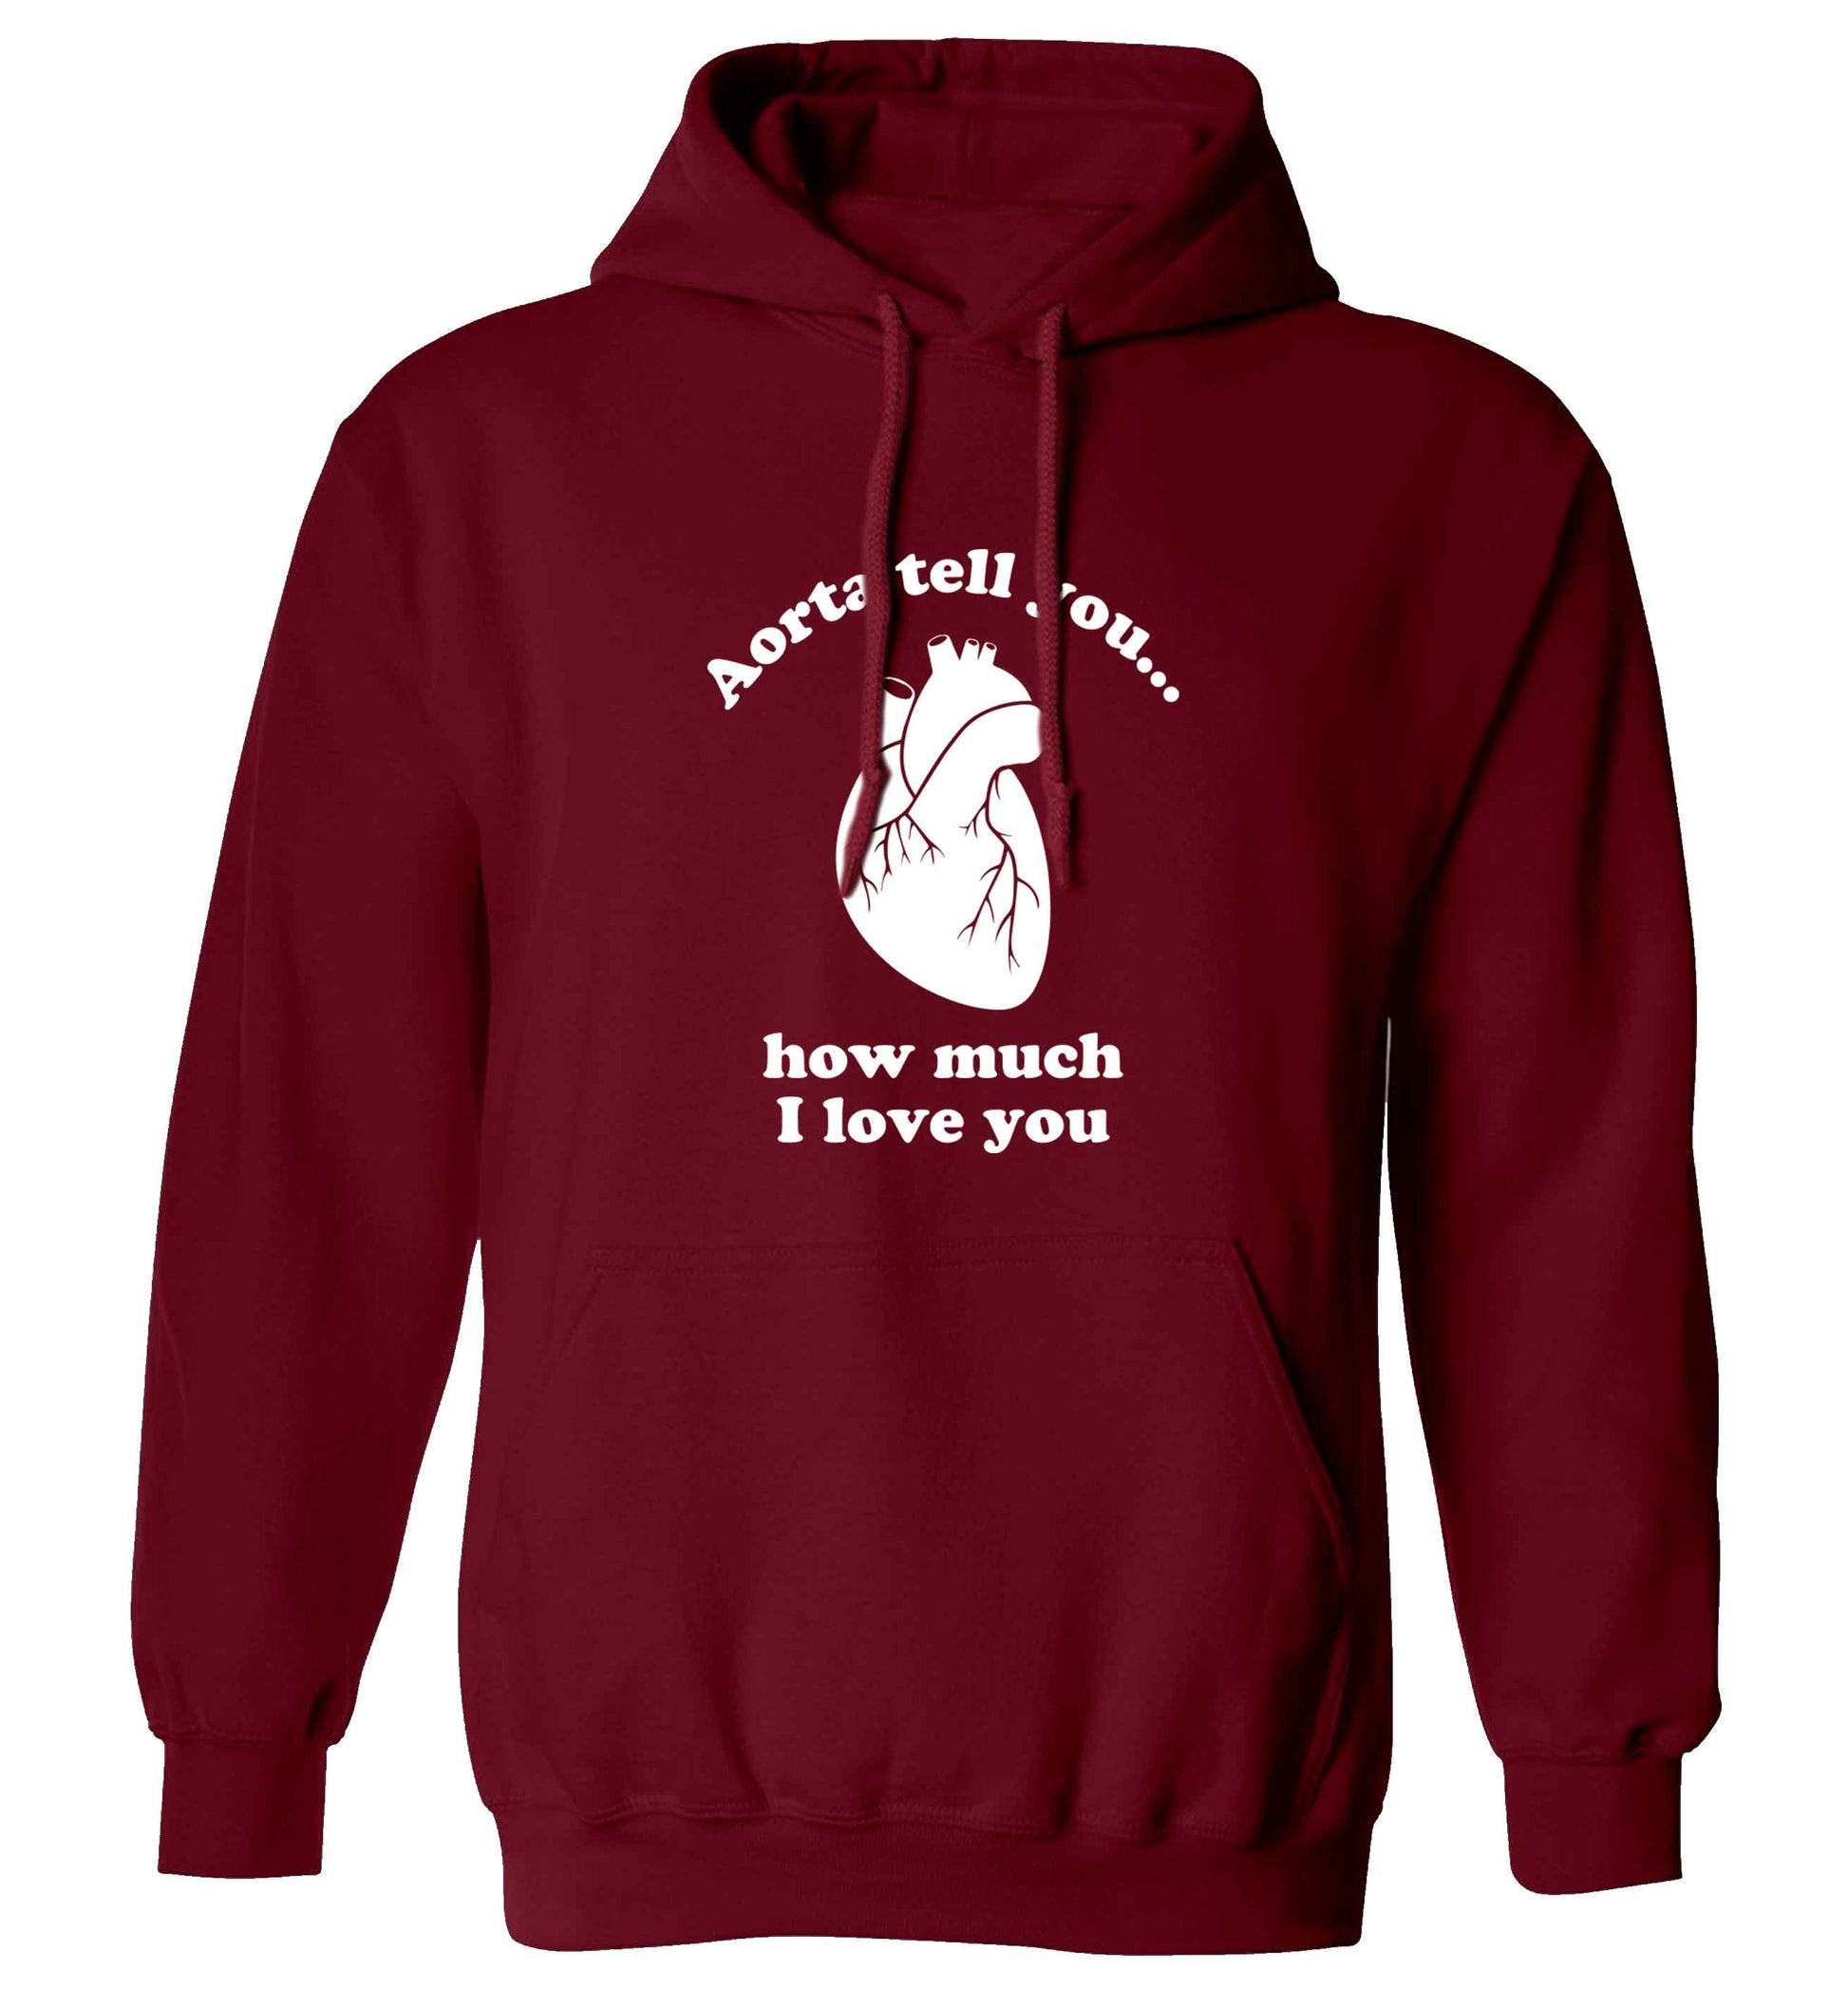 Aorta tell you how much I love you adults unisex maroon hoodie 2XL